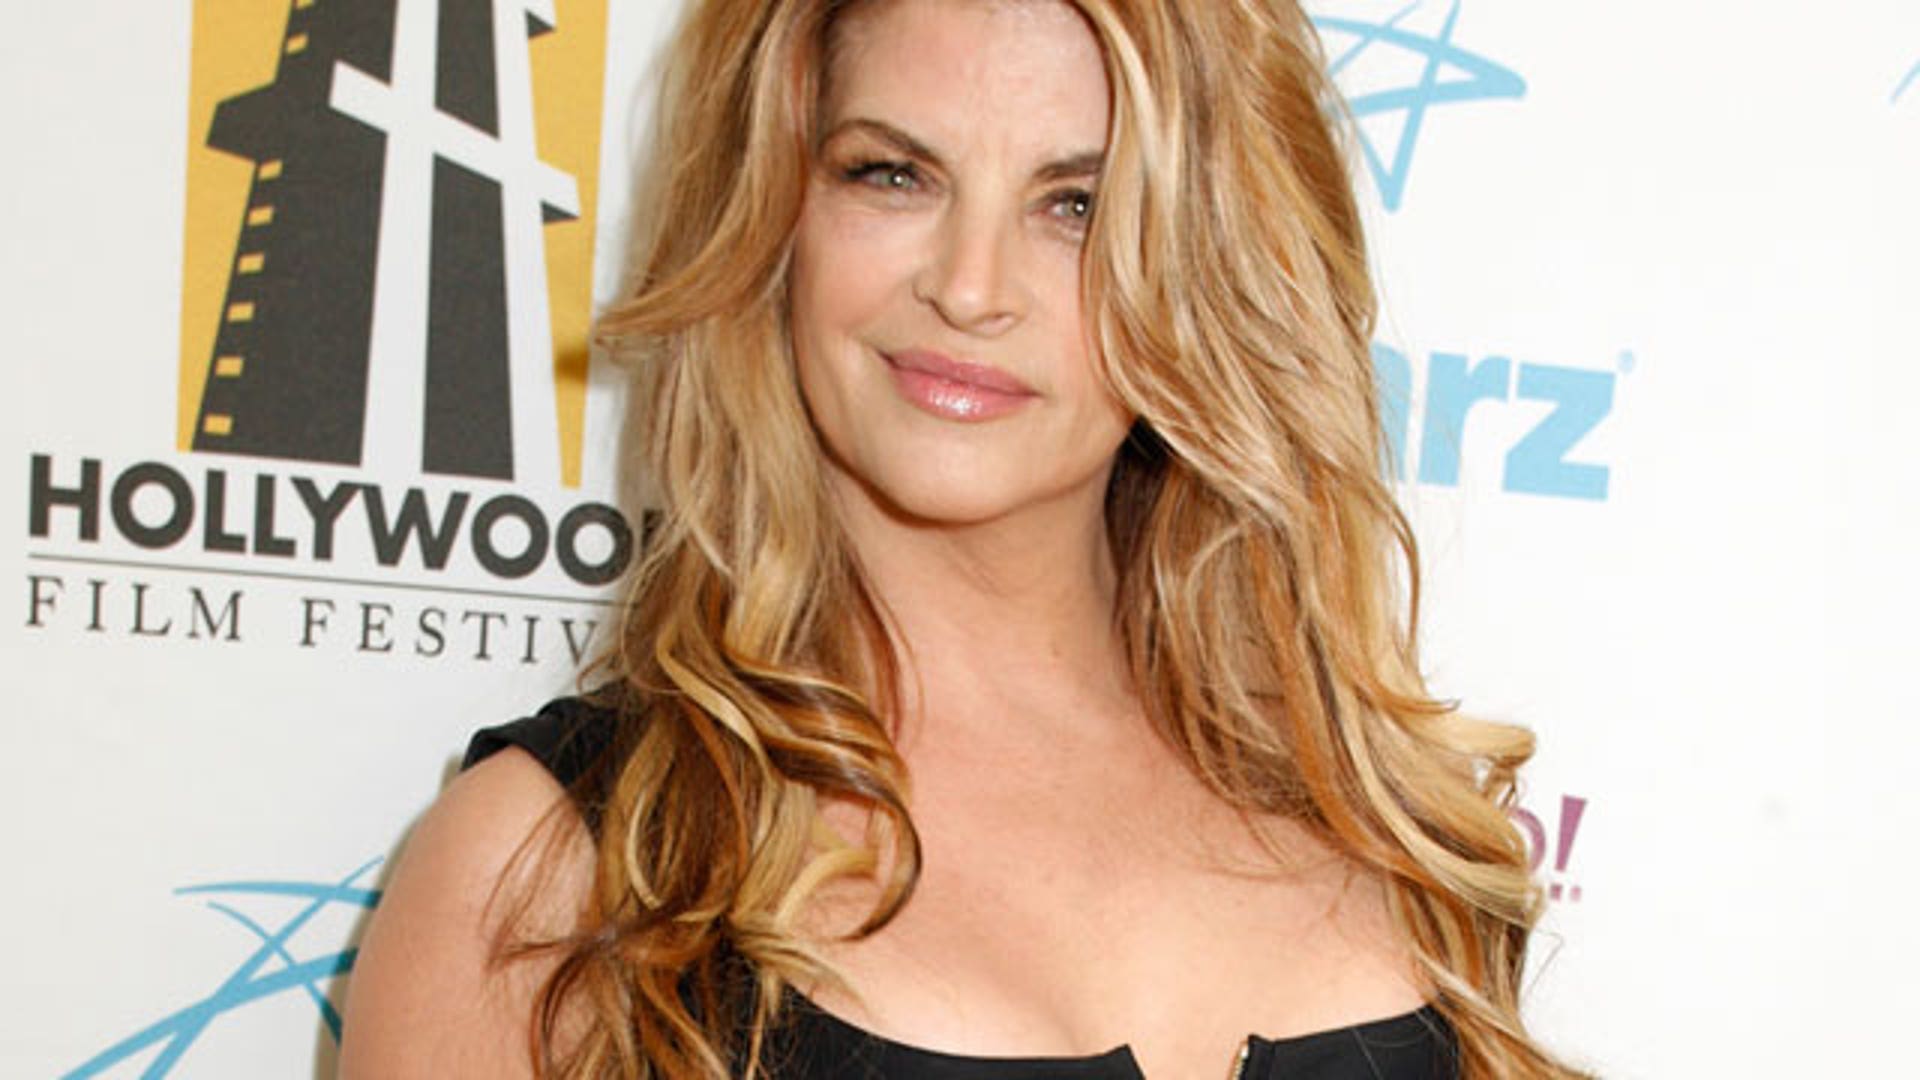 Kirstie Alley's Battle of the Bulge